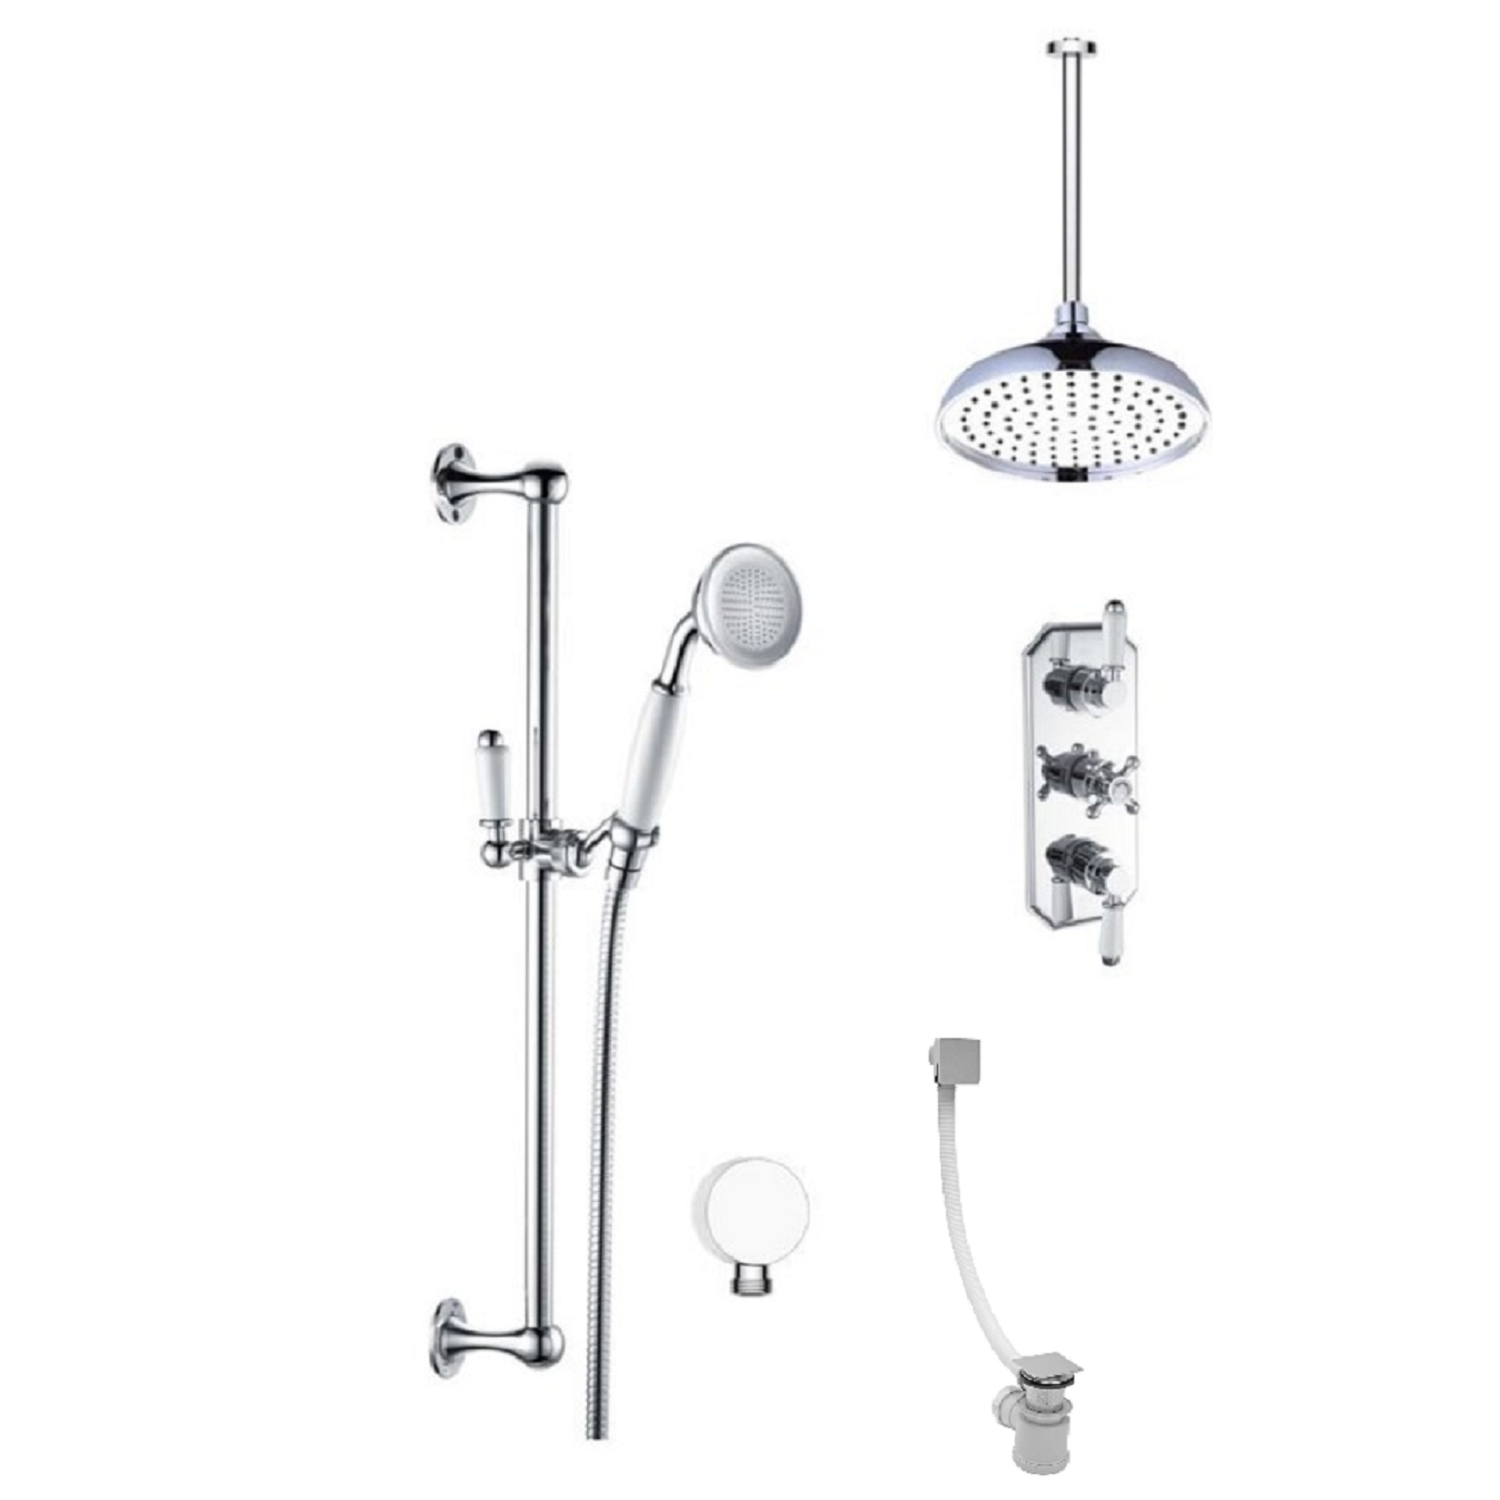 Traditional Concealed Thermostatic Mixer Shower with Celing Overhead Handset & Bath Filler - Cambrid